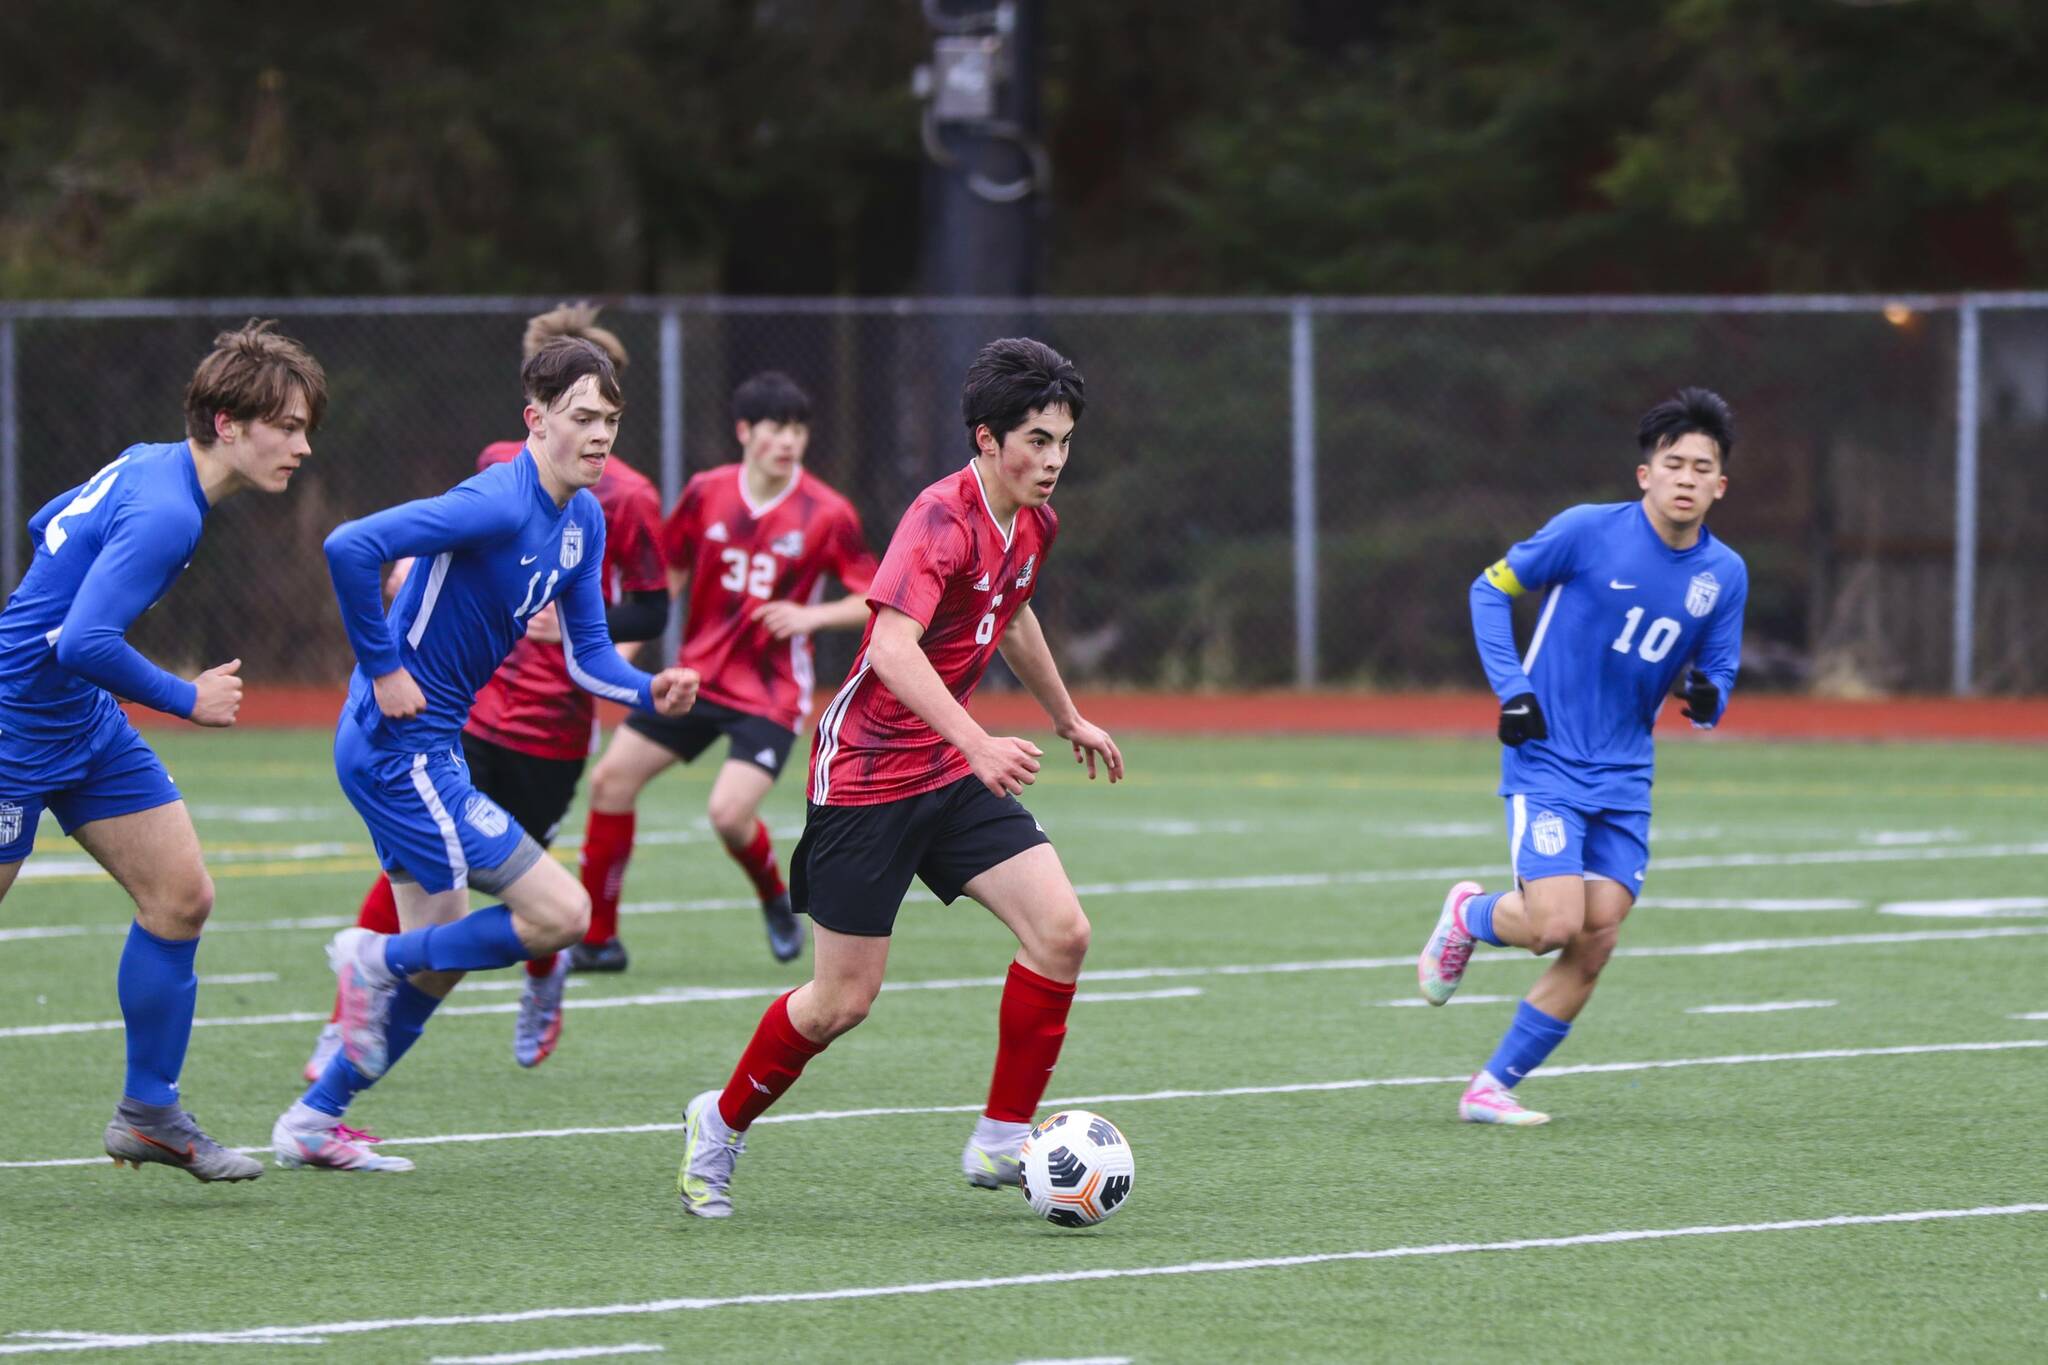 JDHS player Gabe Cheng drives down the field with the ball during a tight game against TMHS on April 23, 2022. (Michael S. Lockett / Juneau Empire file)